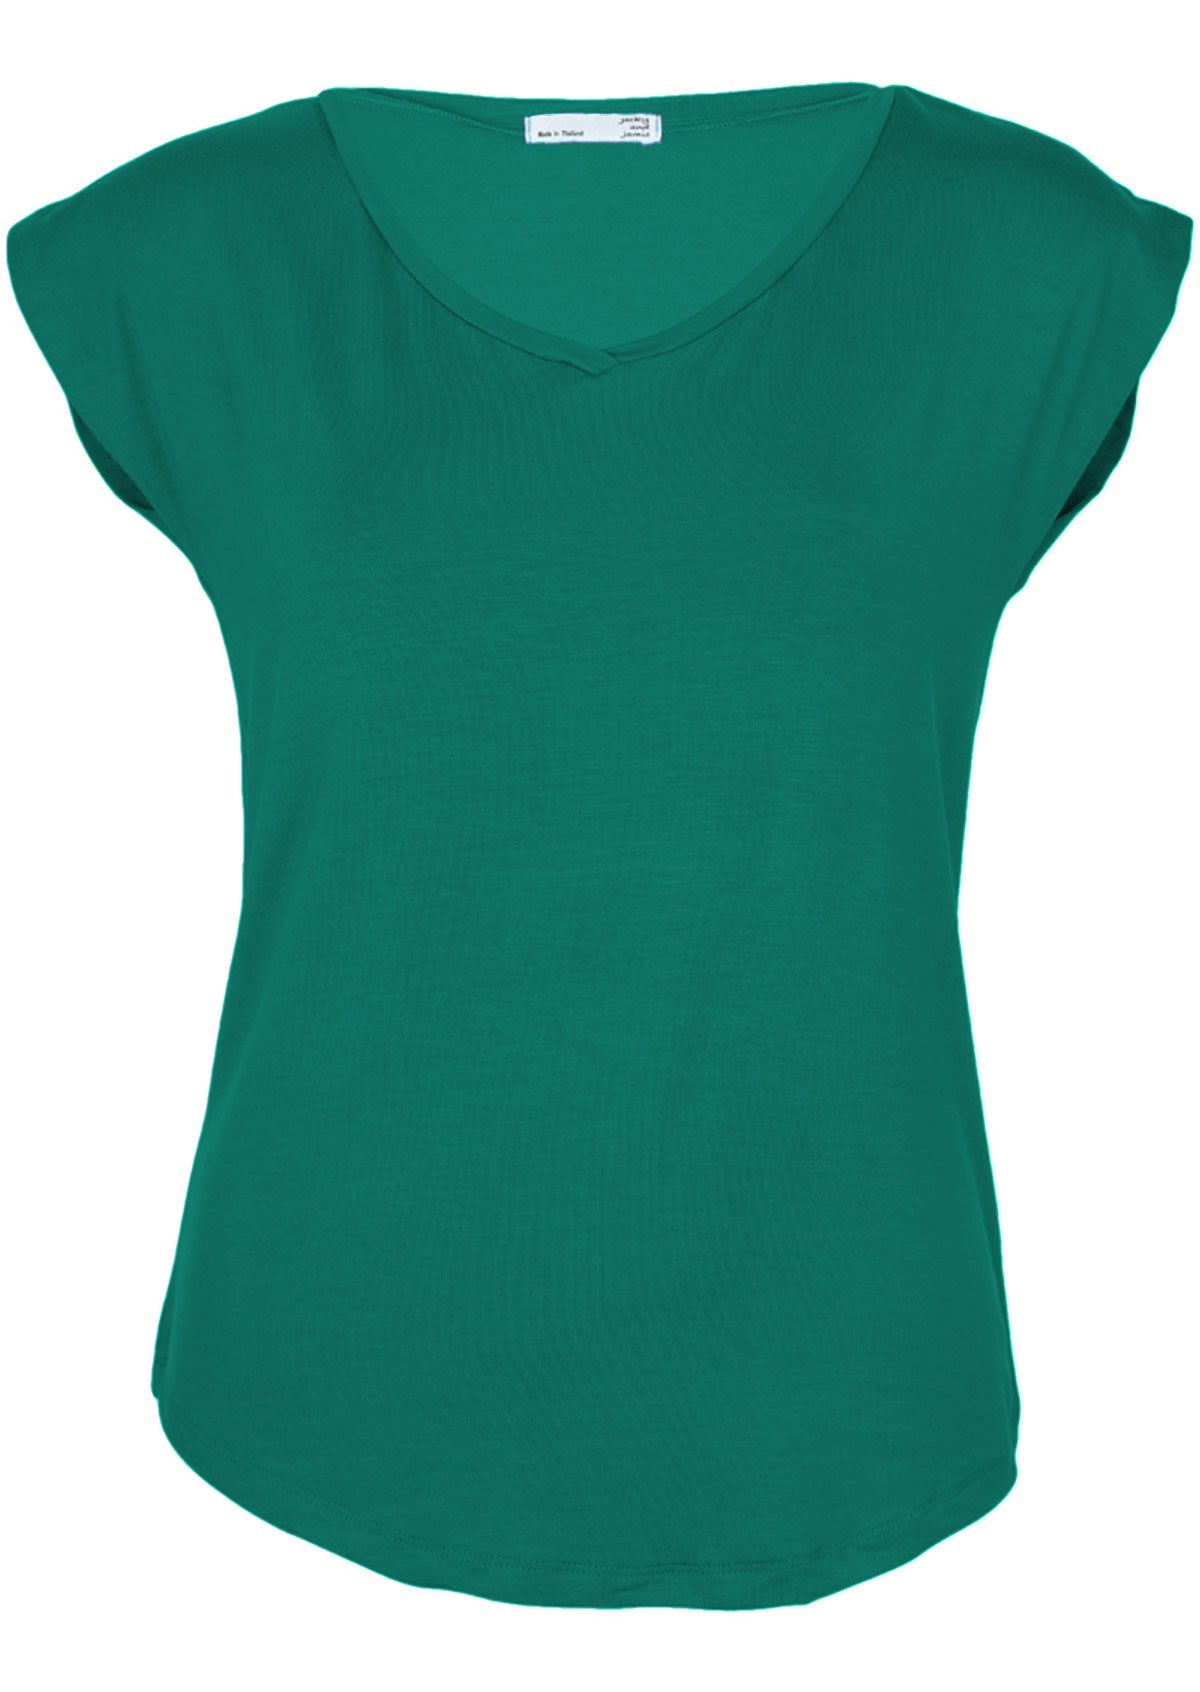 Simple Top V-neck Jade Green front